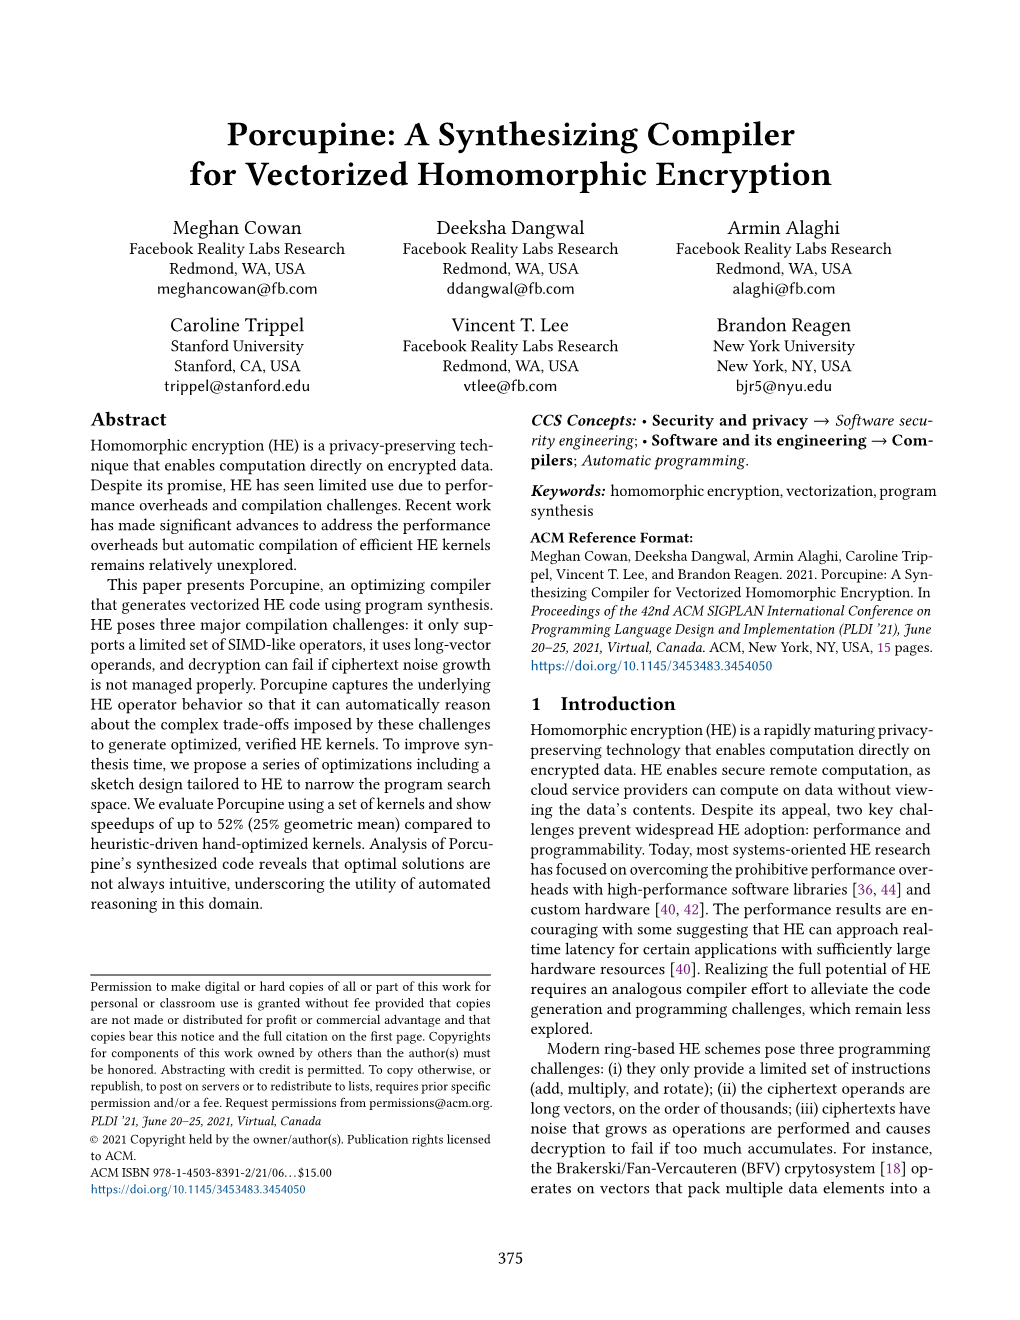 A Synthesizing Compiler for Vectorized Homomorphic Encryption